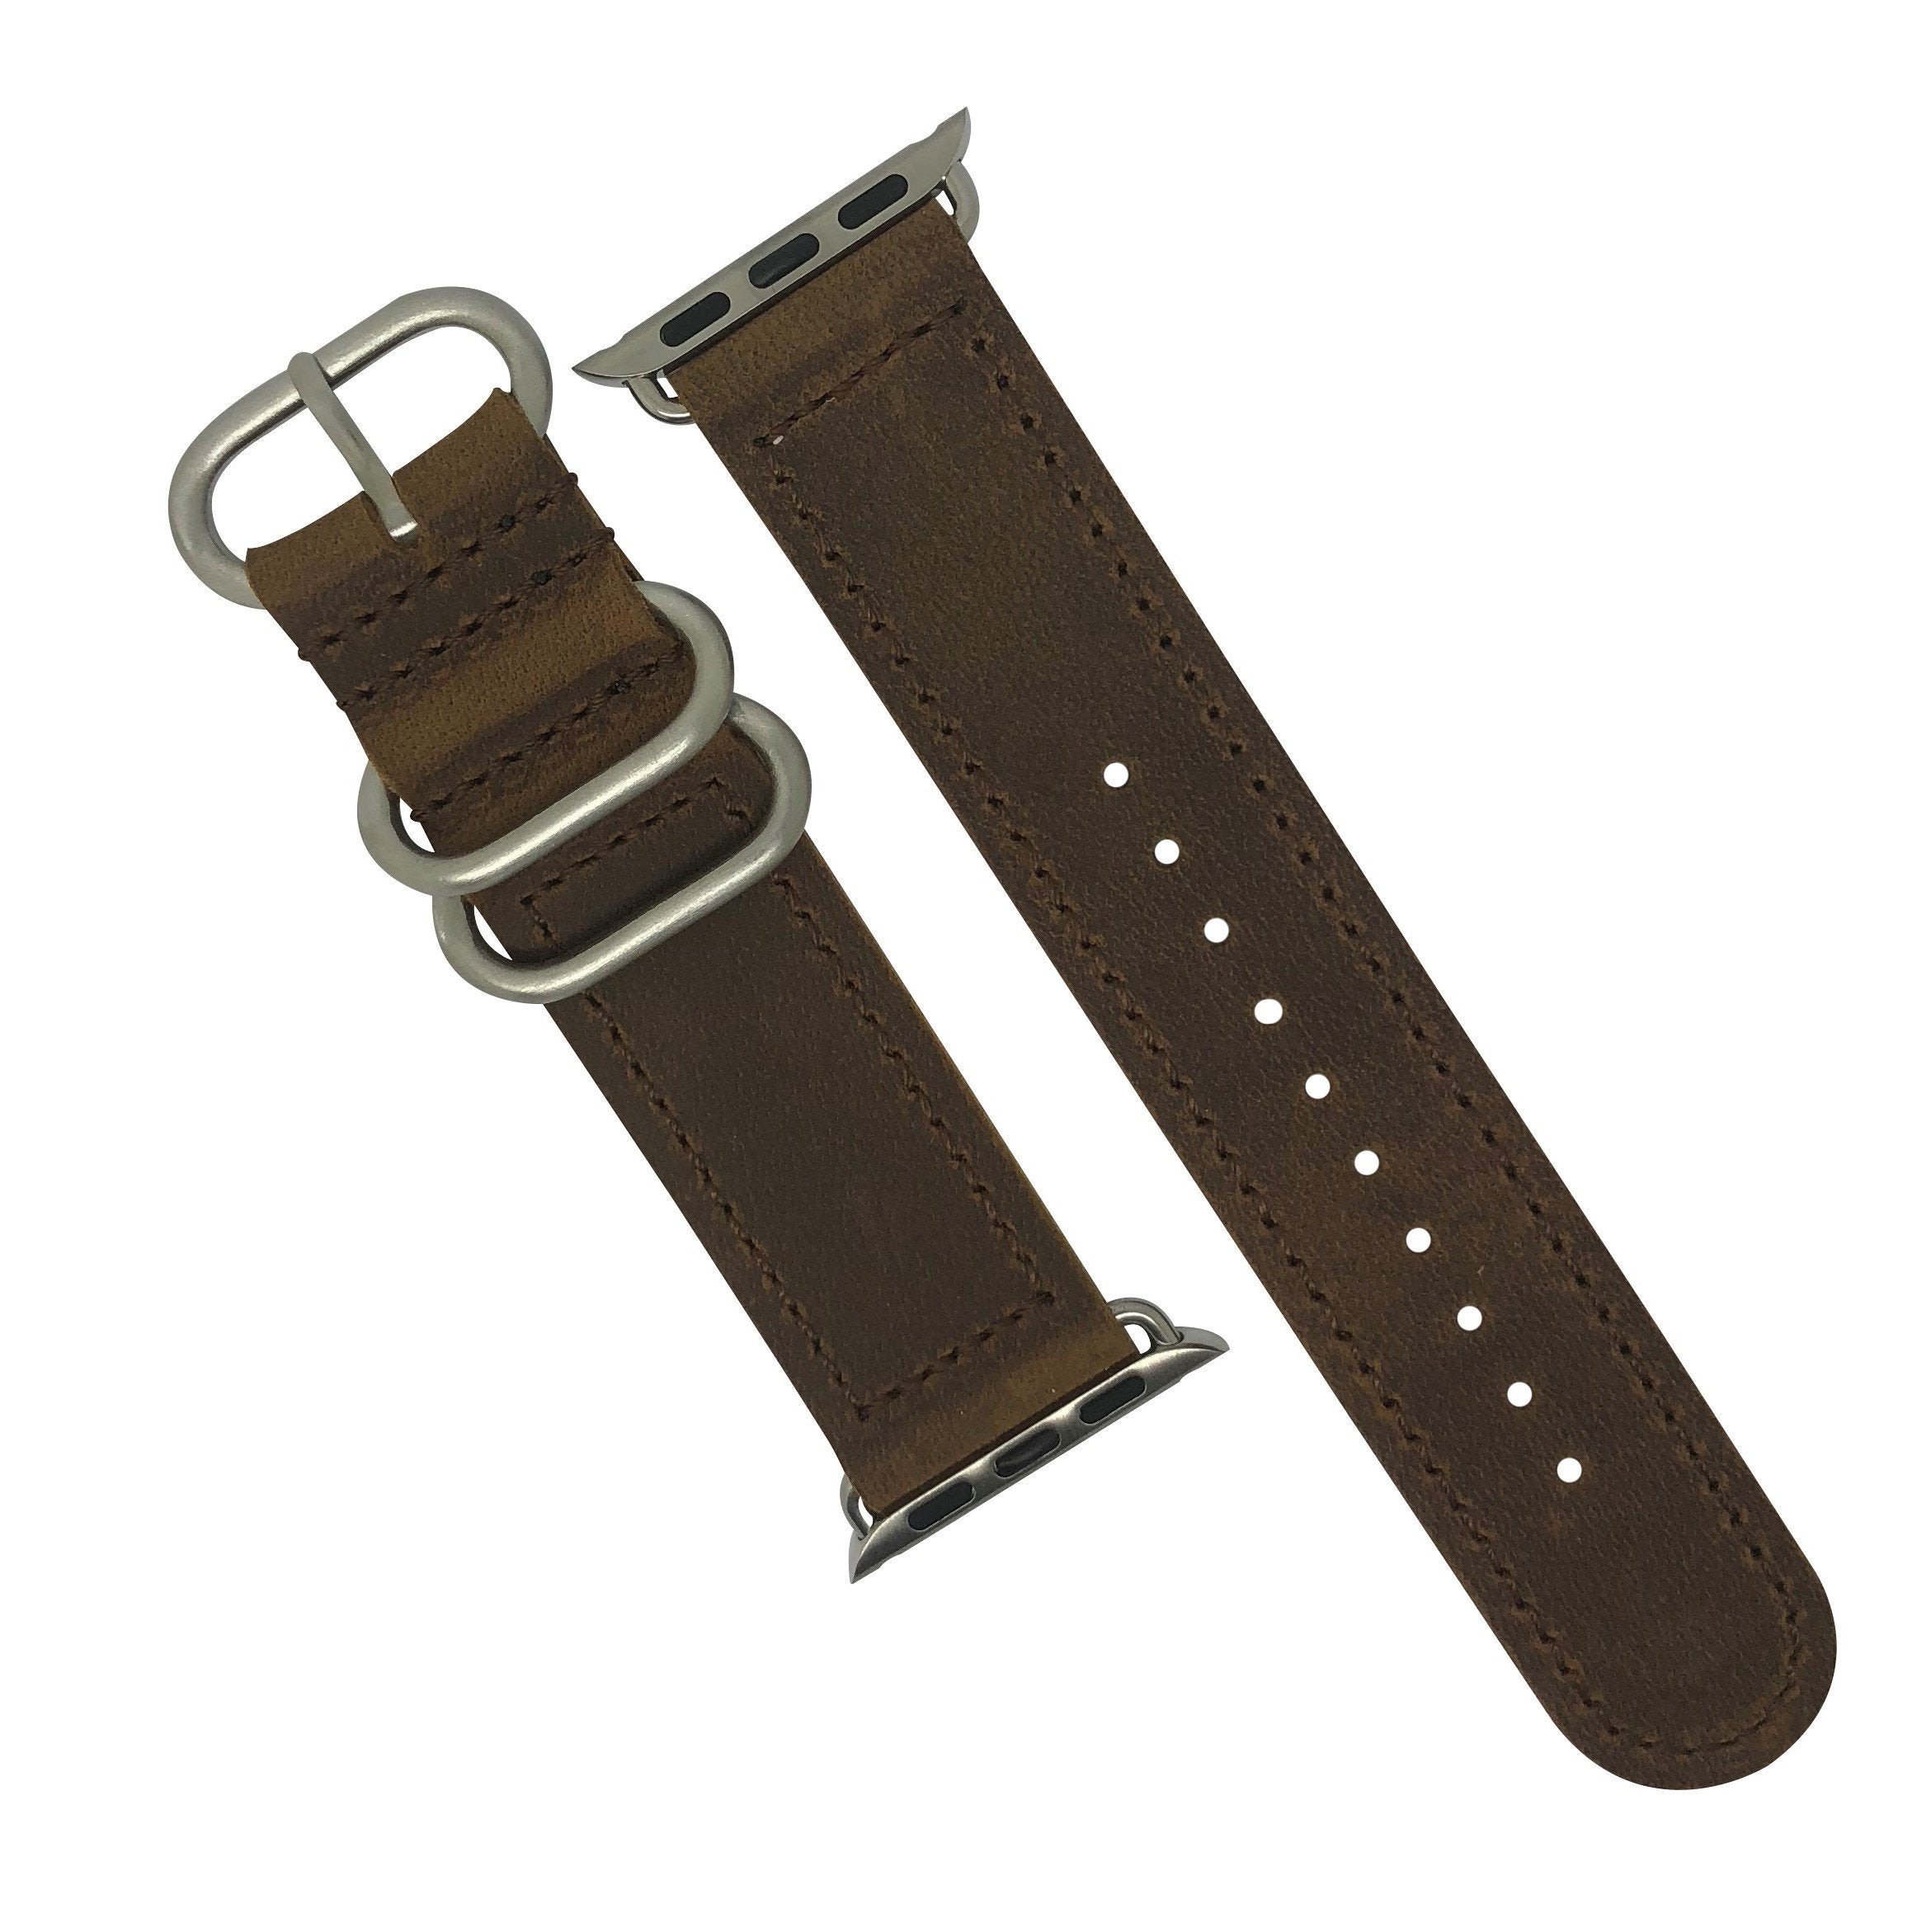 NATO Watch Strap Zulu 3 pack 20mm Green, Tan, Black | Sansom Watches,  Rolex, Breitling, Omega, and more